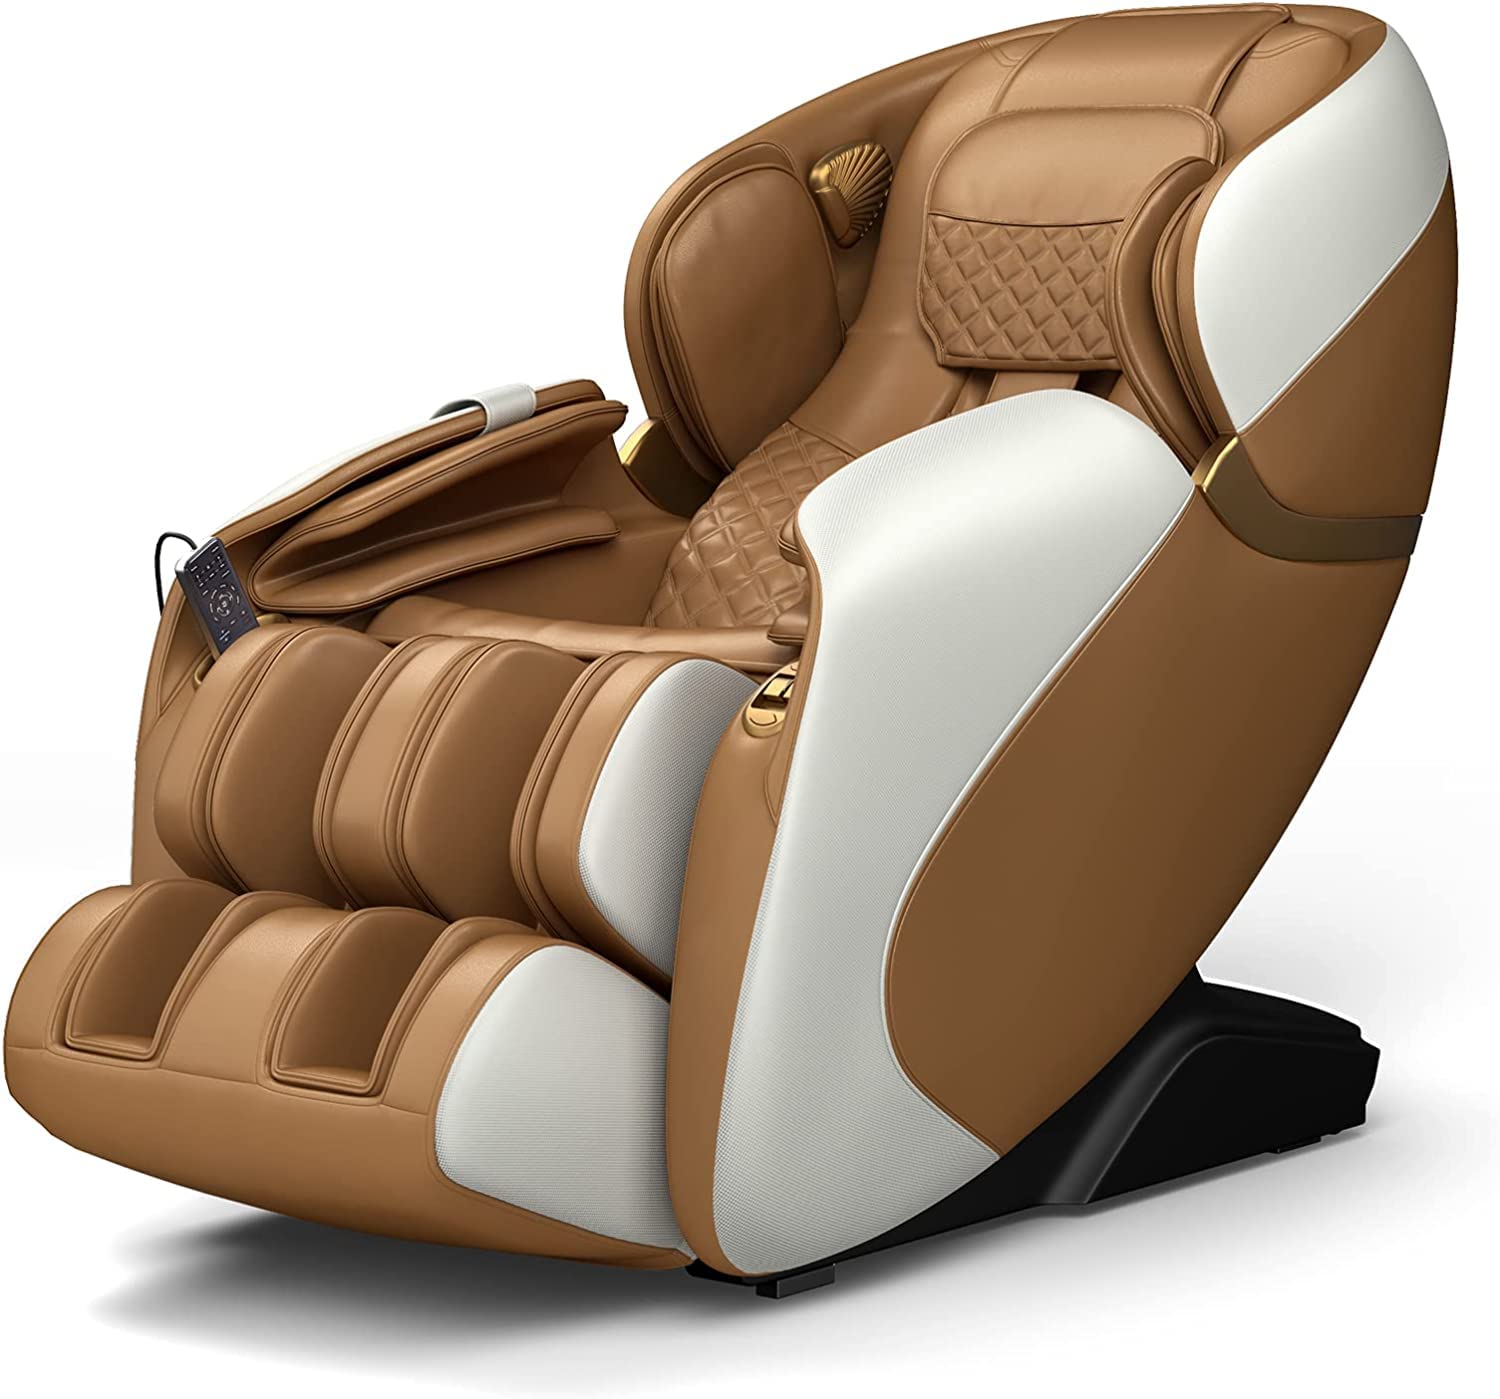 COSTWAY Massage Chair, Full Body Zero Gravity Massage Recliner with 12 Auto Modes, 53-Inch SL Track, 28 Airbags, Thai Stretch, Bluetooth Speaker, Foot Roller, Heat Therapy, Space-Saving, Coffee